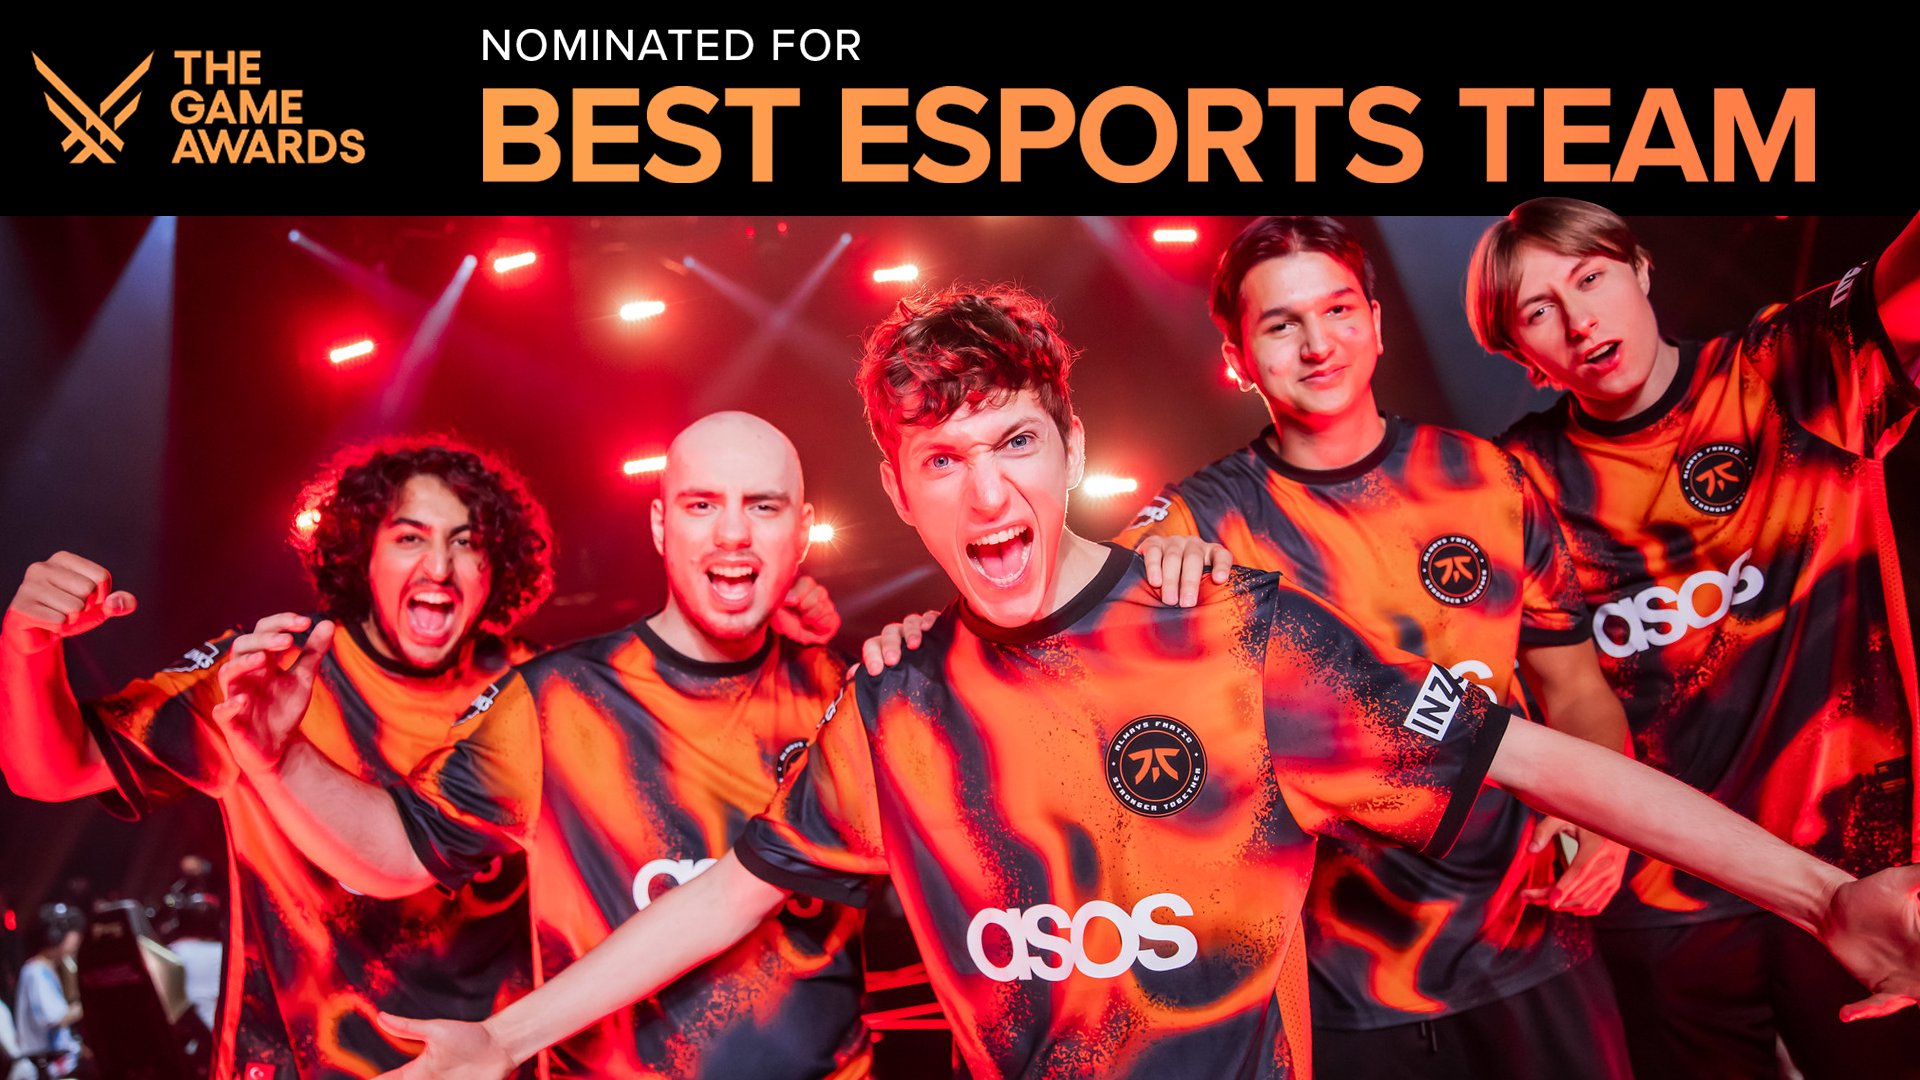 FNATIC on X: From our comeback in São Paulo to taking 2 trophies in  Tokyo We've been nominated for #TheGameAwards Best Esports team, so be  sure to vote using the link below!